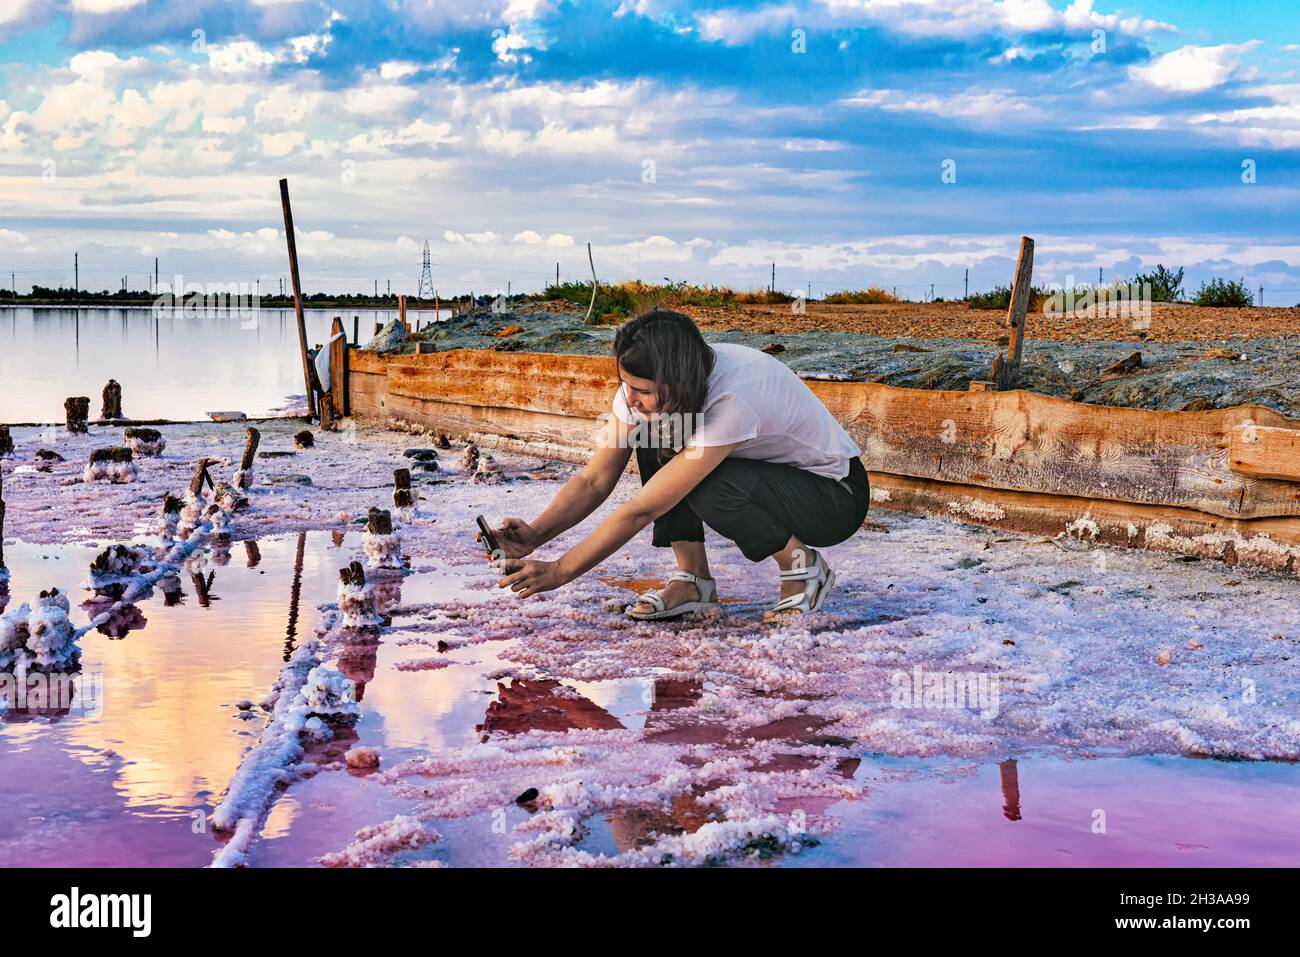 A young woman takes pictures on a salt lake Stock Photo